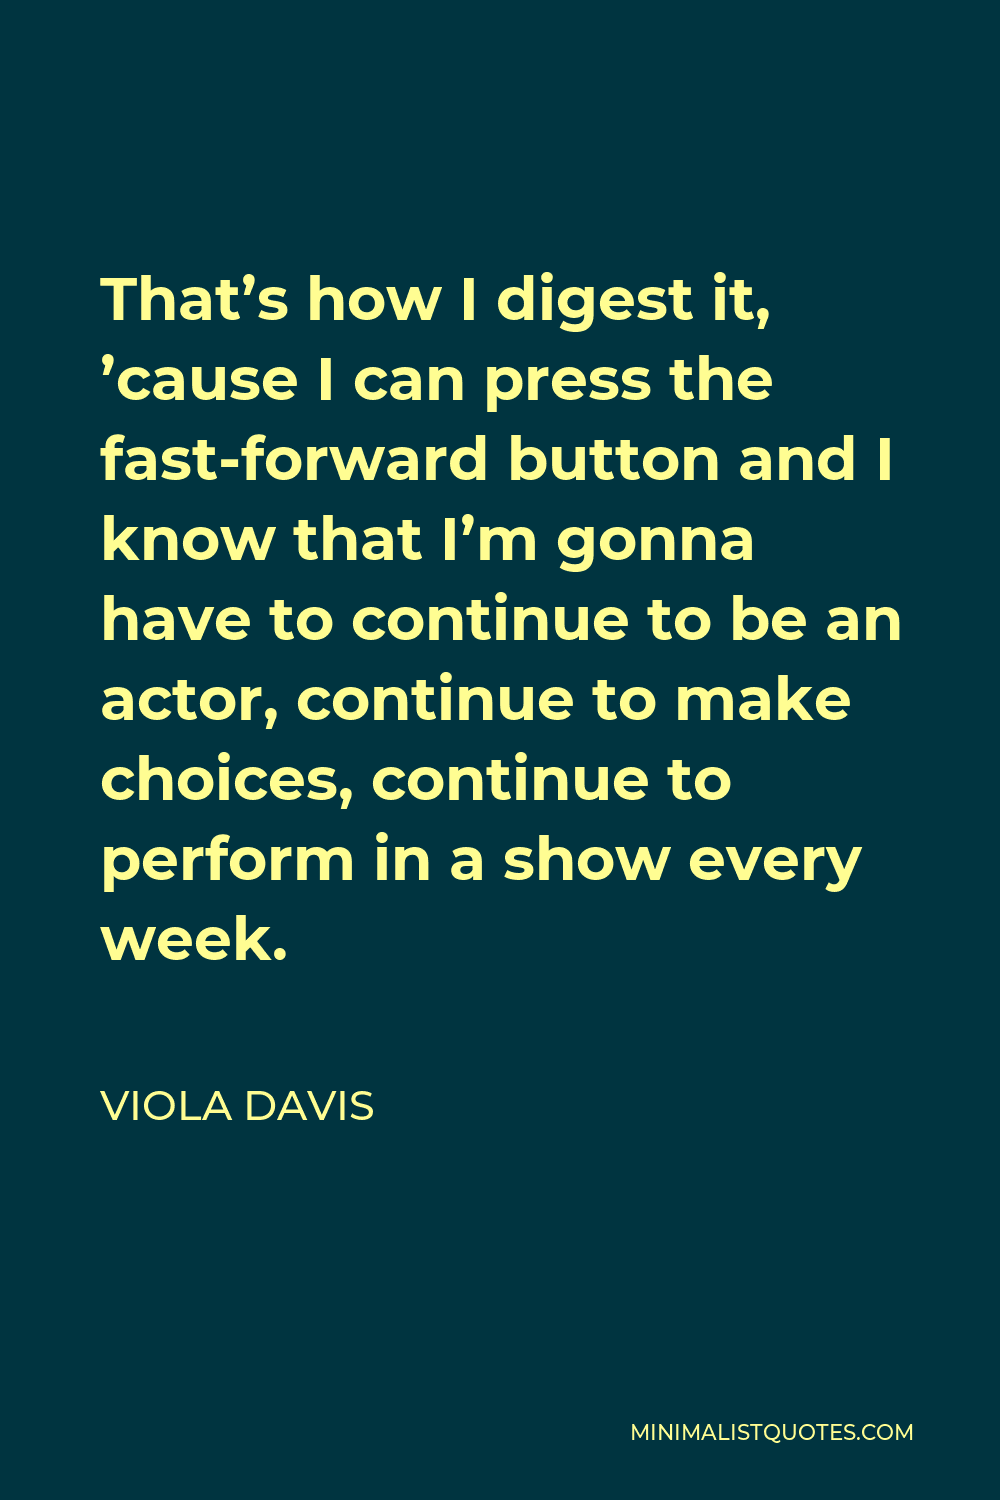 Viola Davis Quote - That’s how I digest it, ’cause I can press the fast-forward button and I know that I’m gonna have to continue to be an actor, continue to make choices, continue to perform in a show every week.